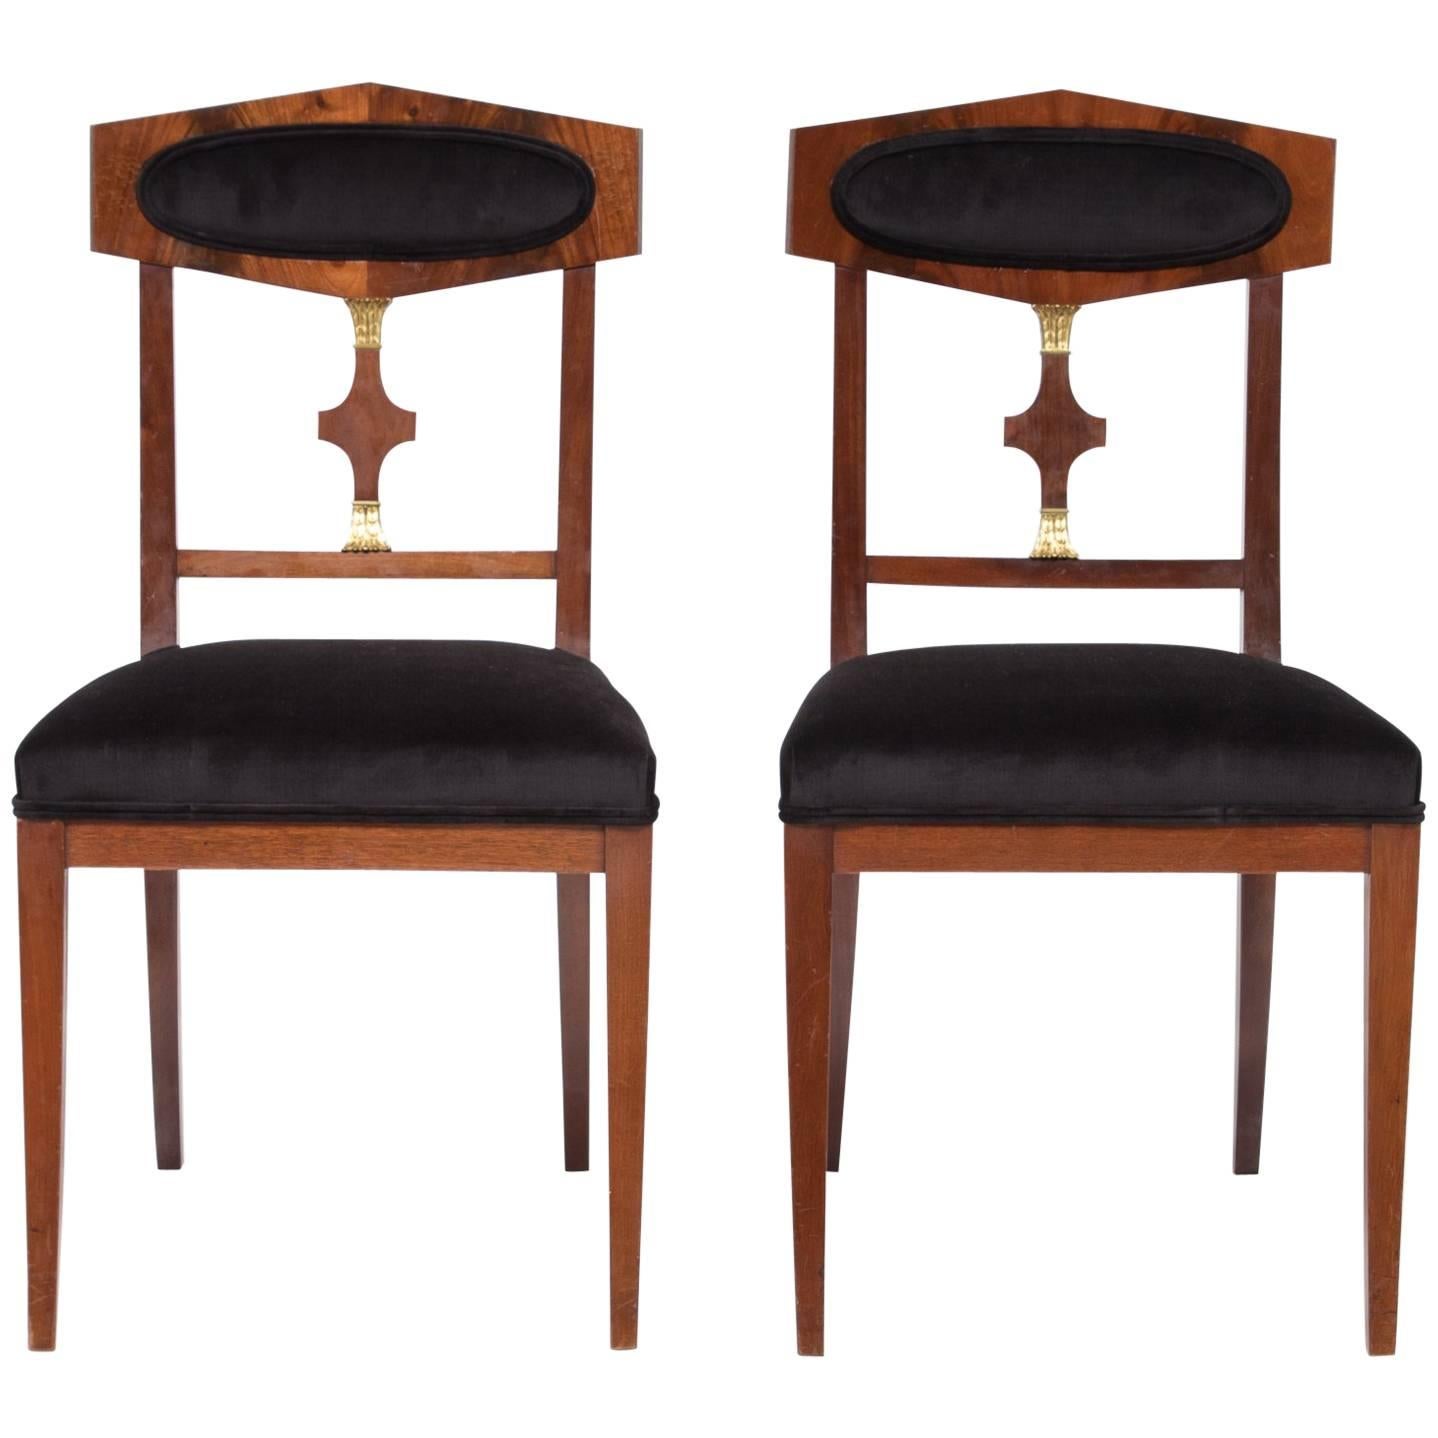 Vintage Swedish Empire Side Chairs